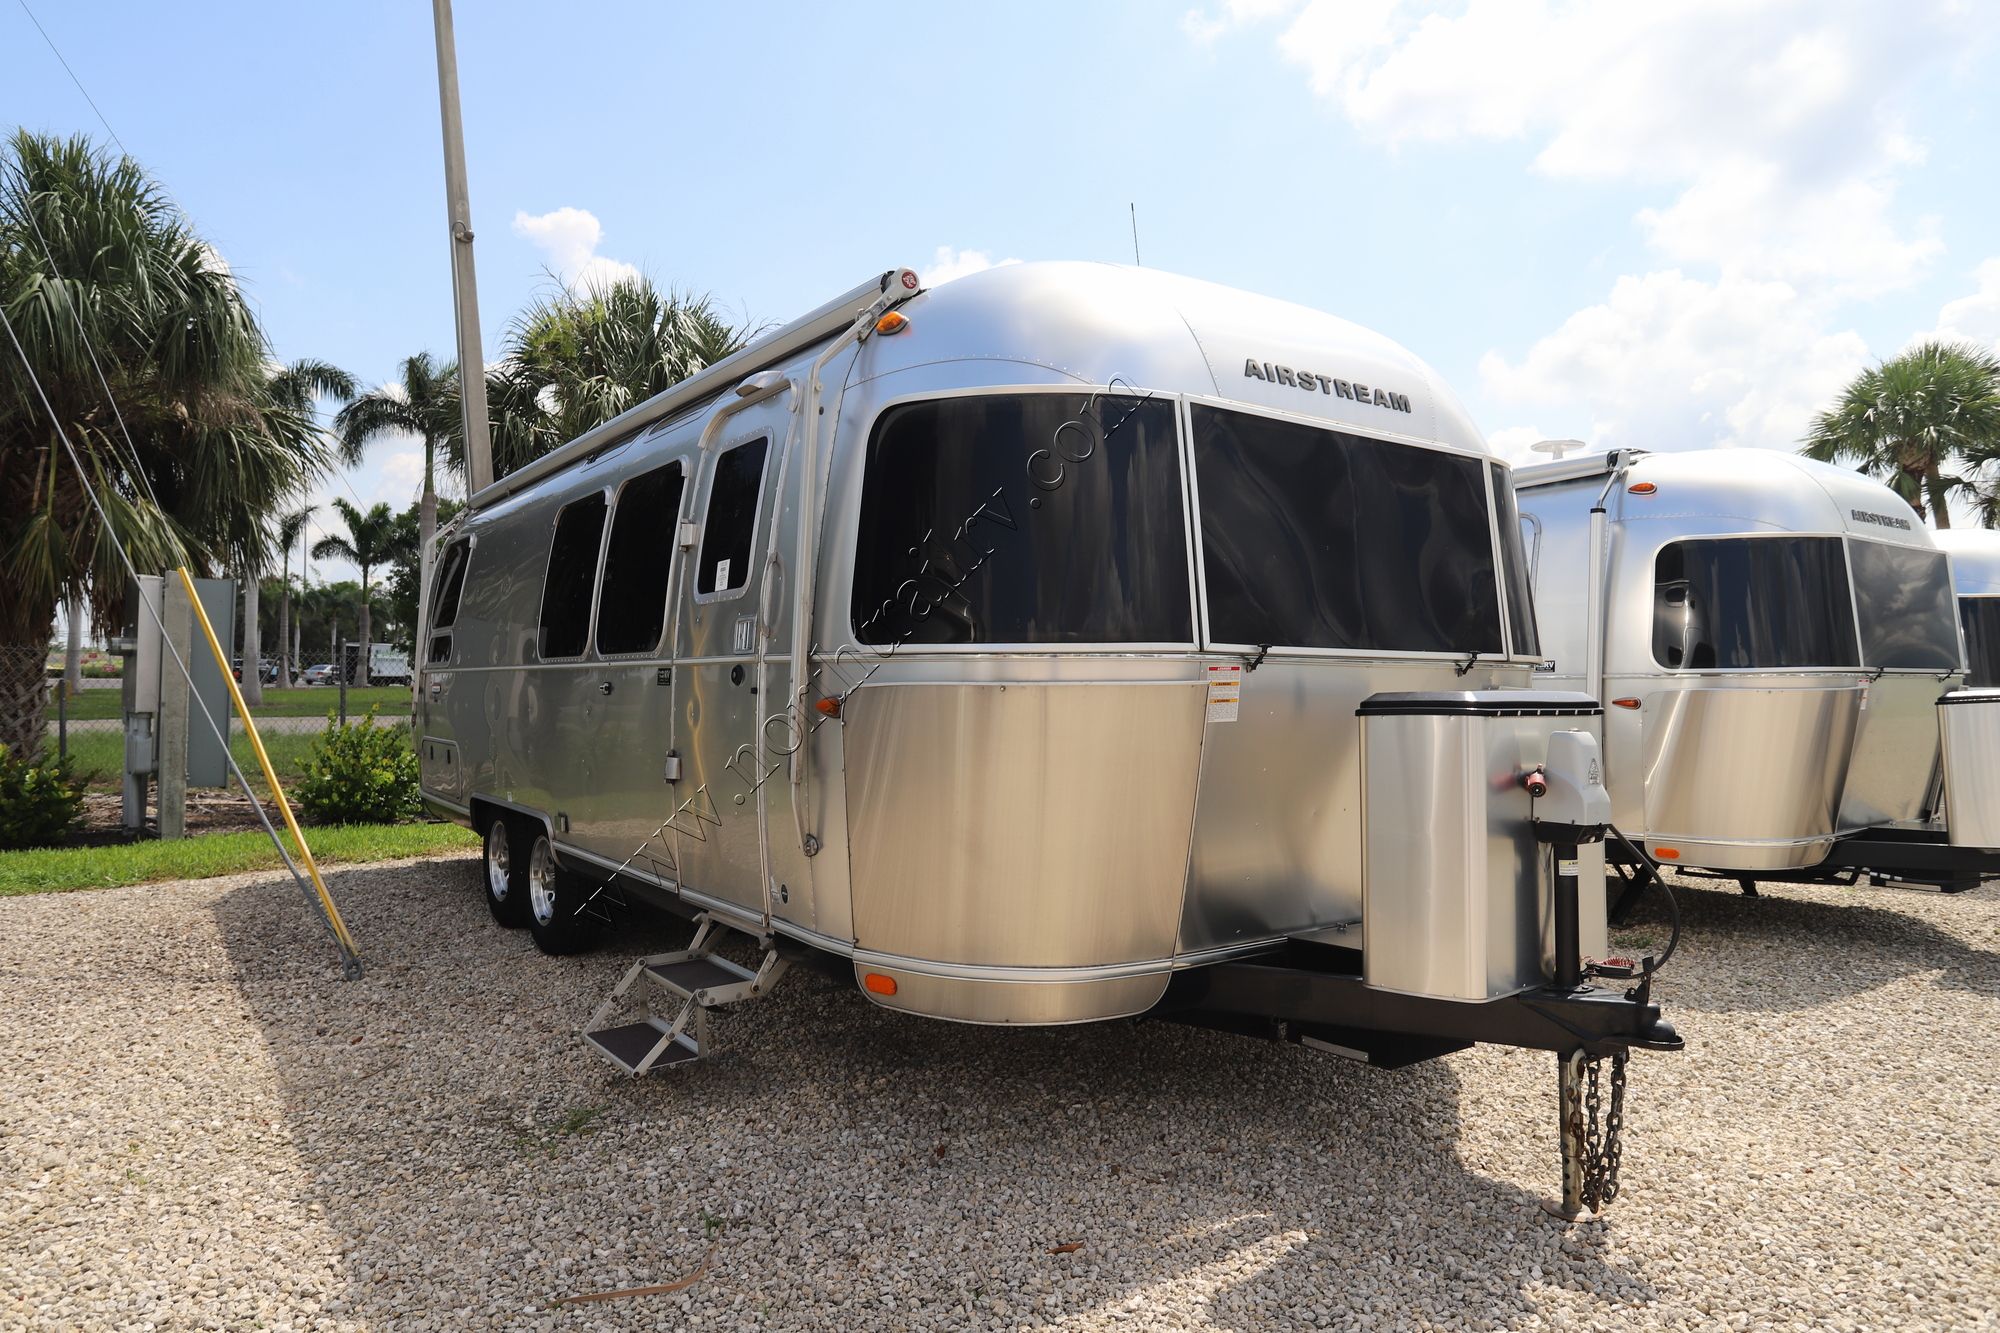 2018 Airstream International 28RBT Travel Trailer Used  For Sale